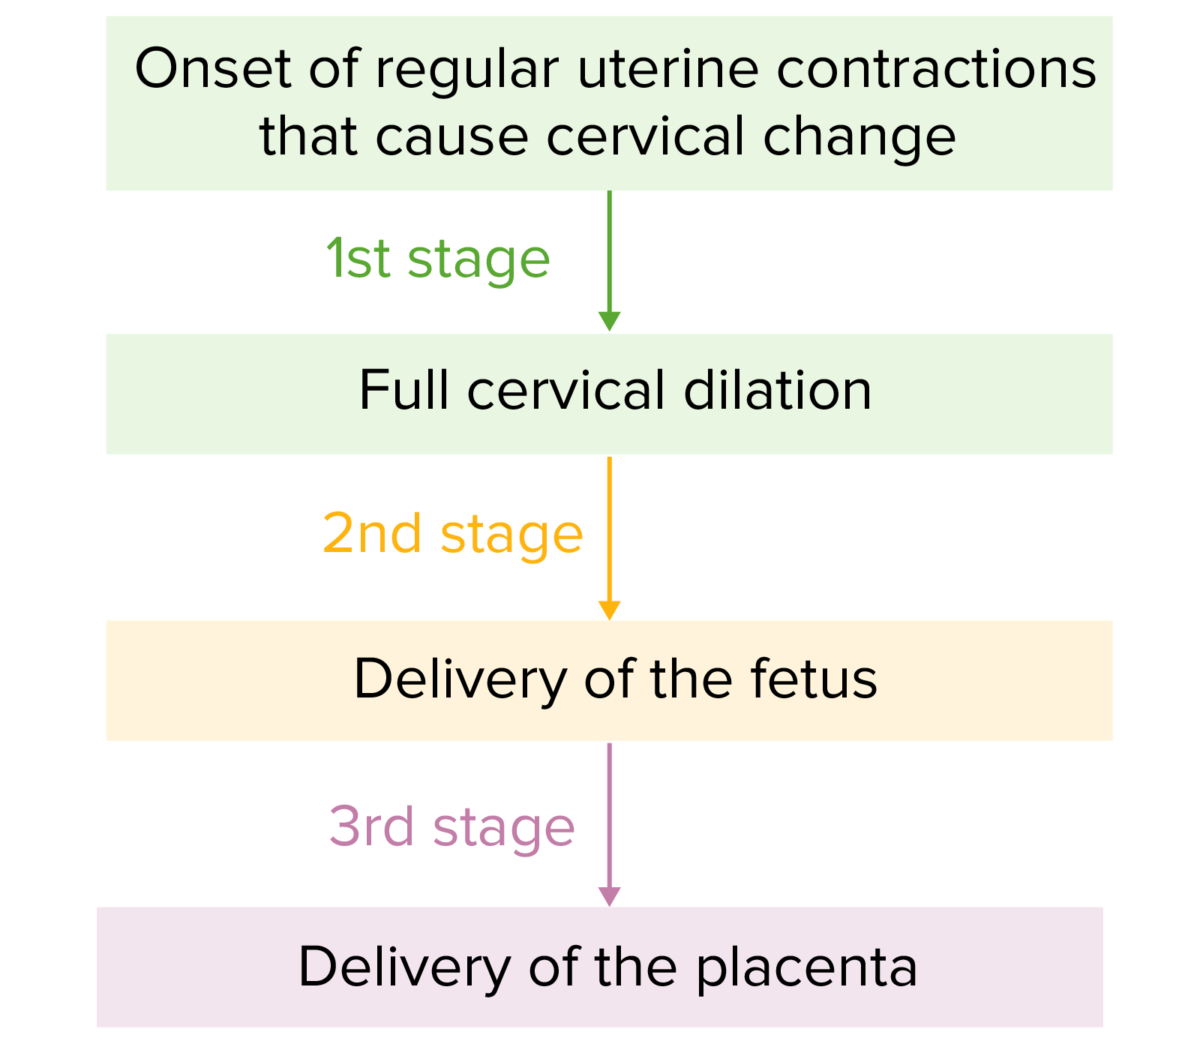 Progression through the 3 stages of labor